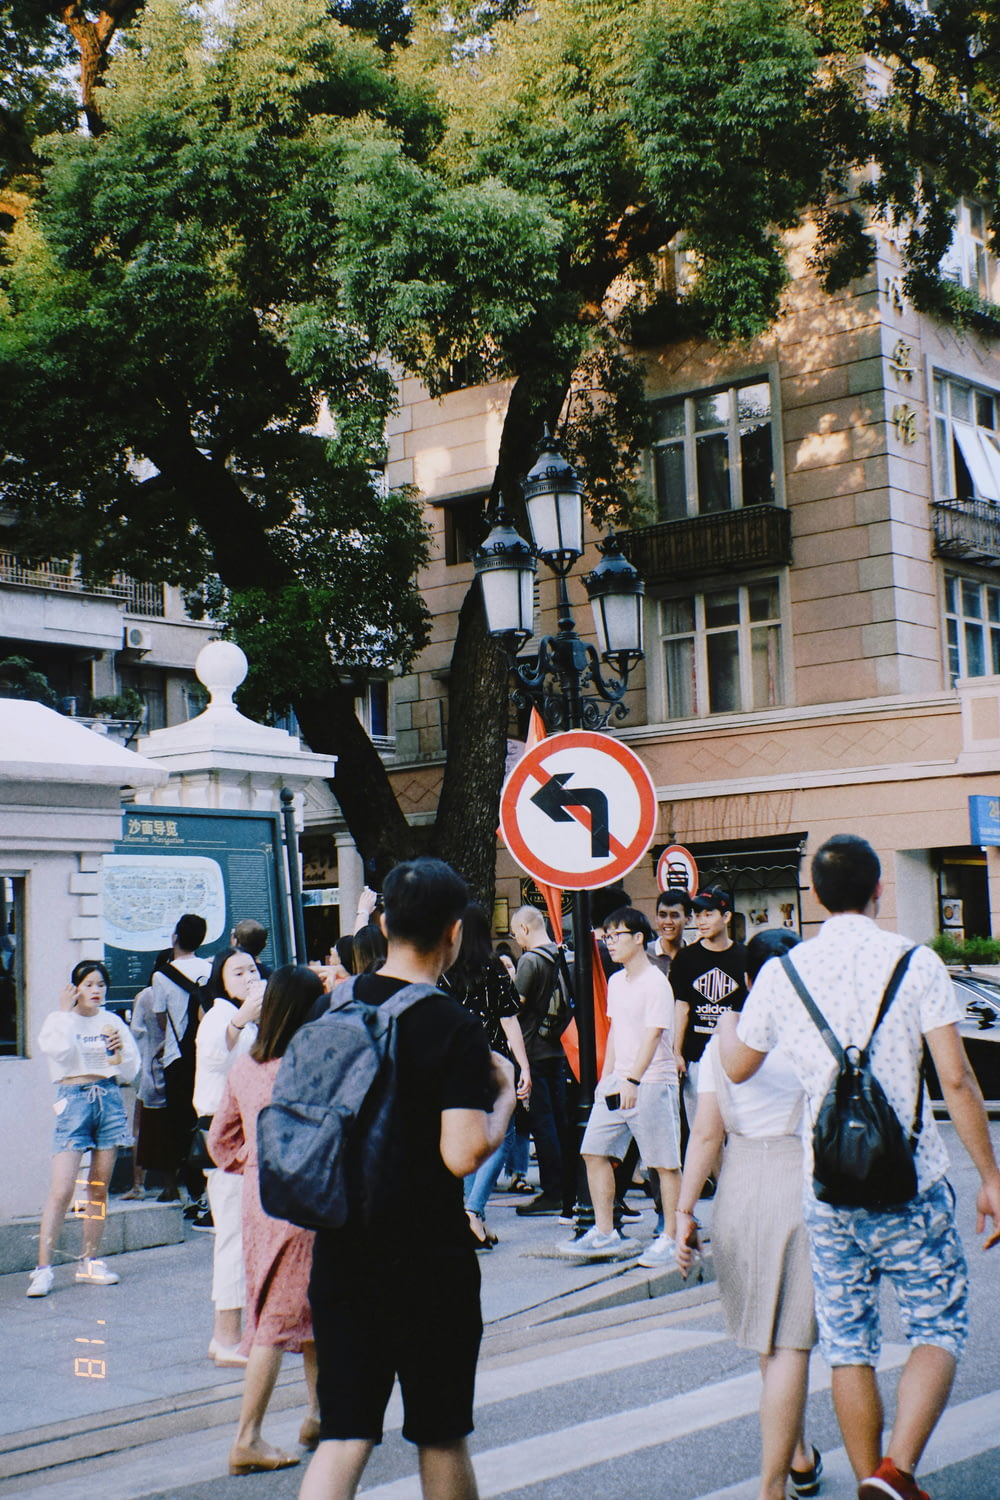 urban photo of a street with crowd